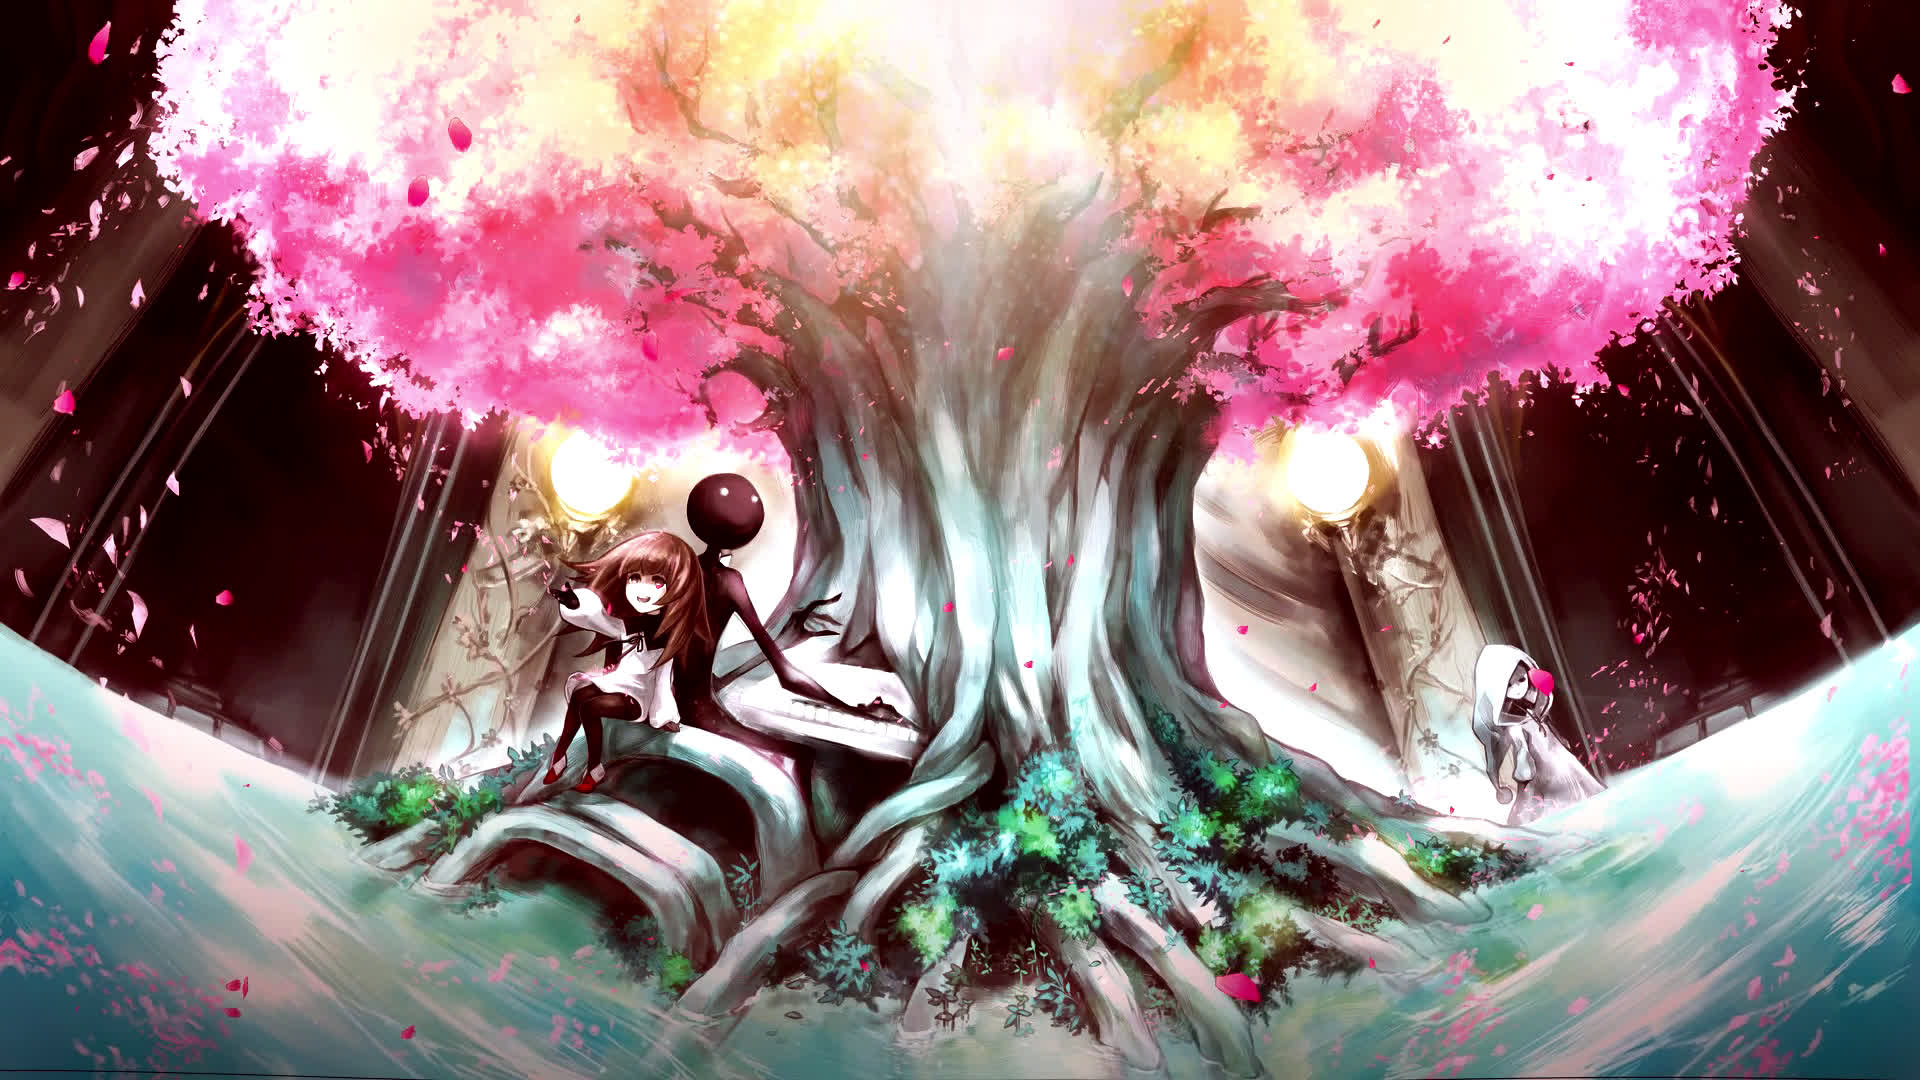 Deemo II: A young girl struggling to return home after she tumbles into the titular Deemo's world. 1920x1080 Full HD Wallpaper.